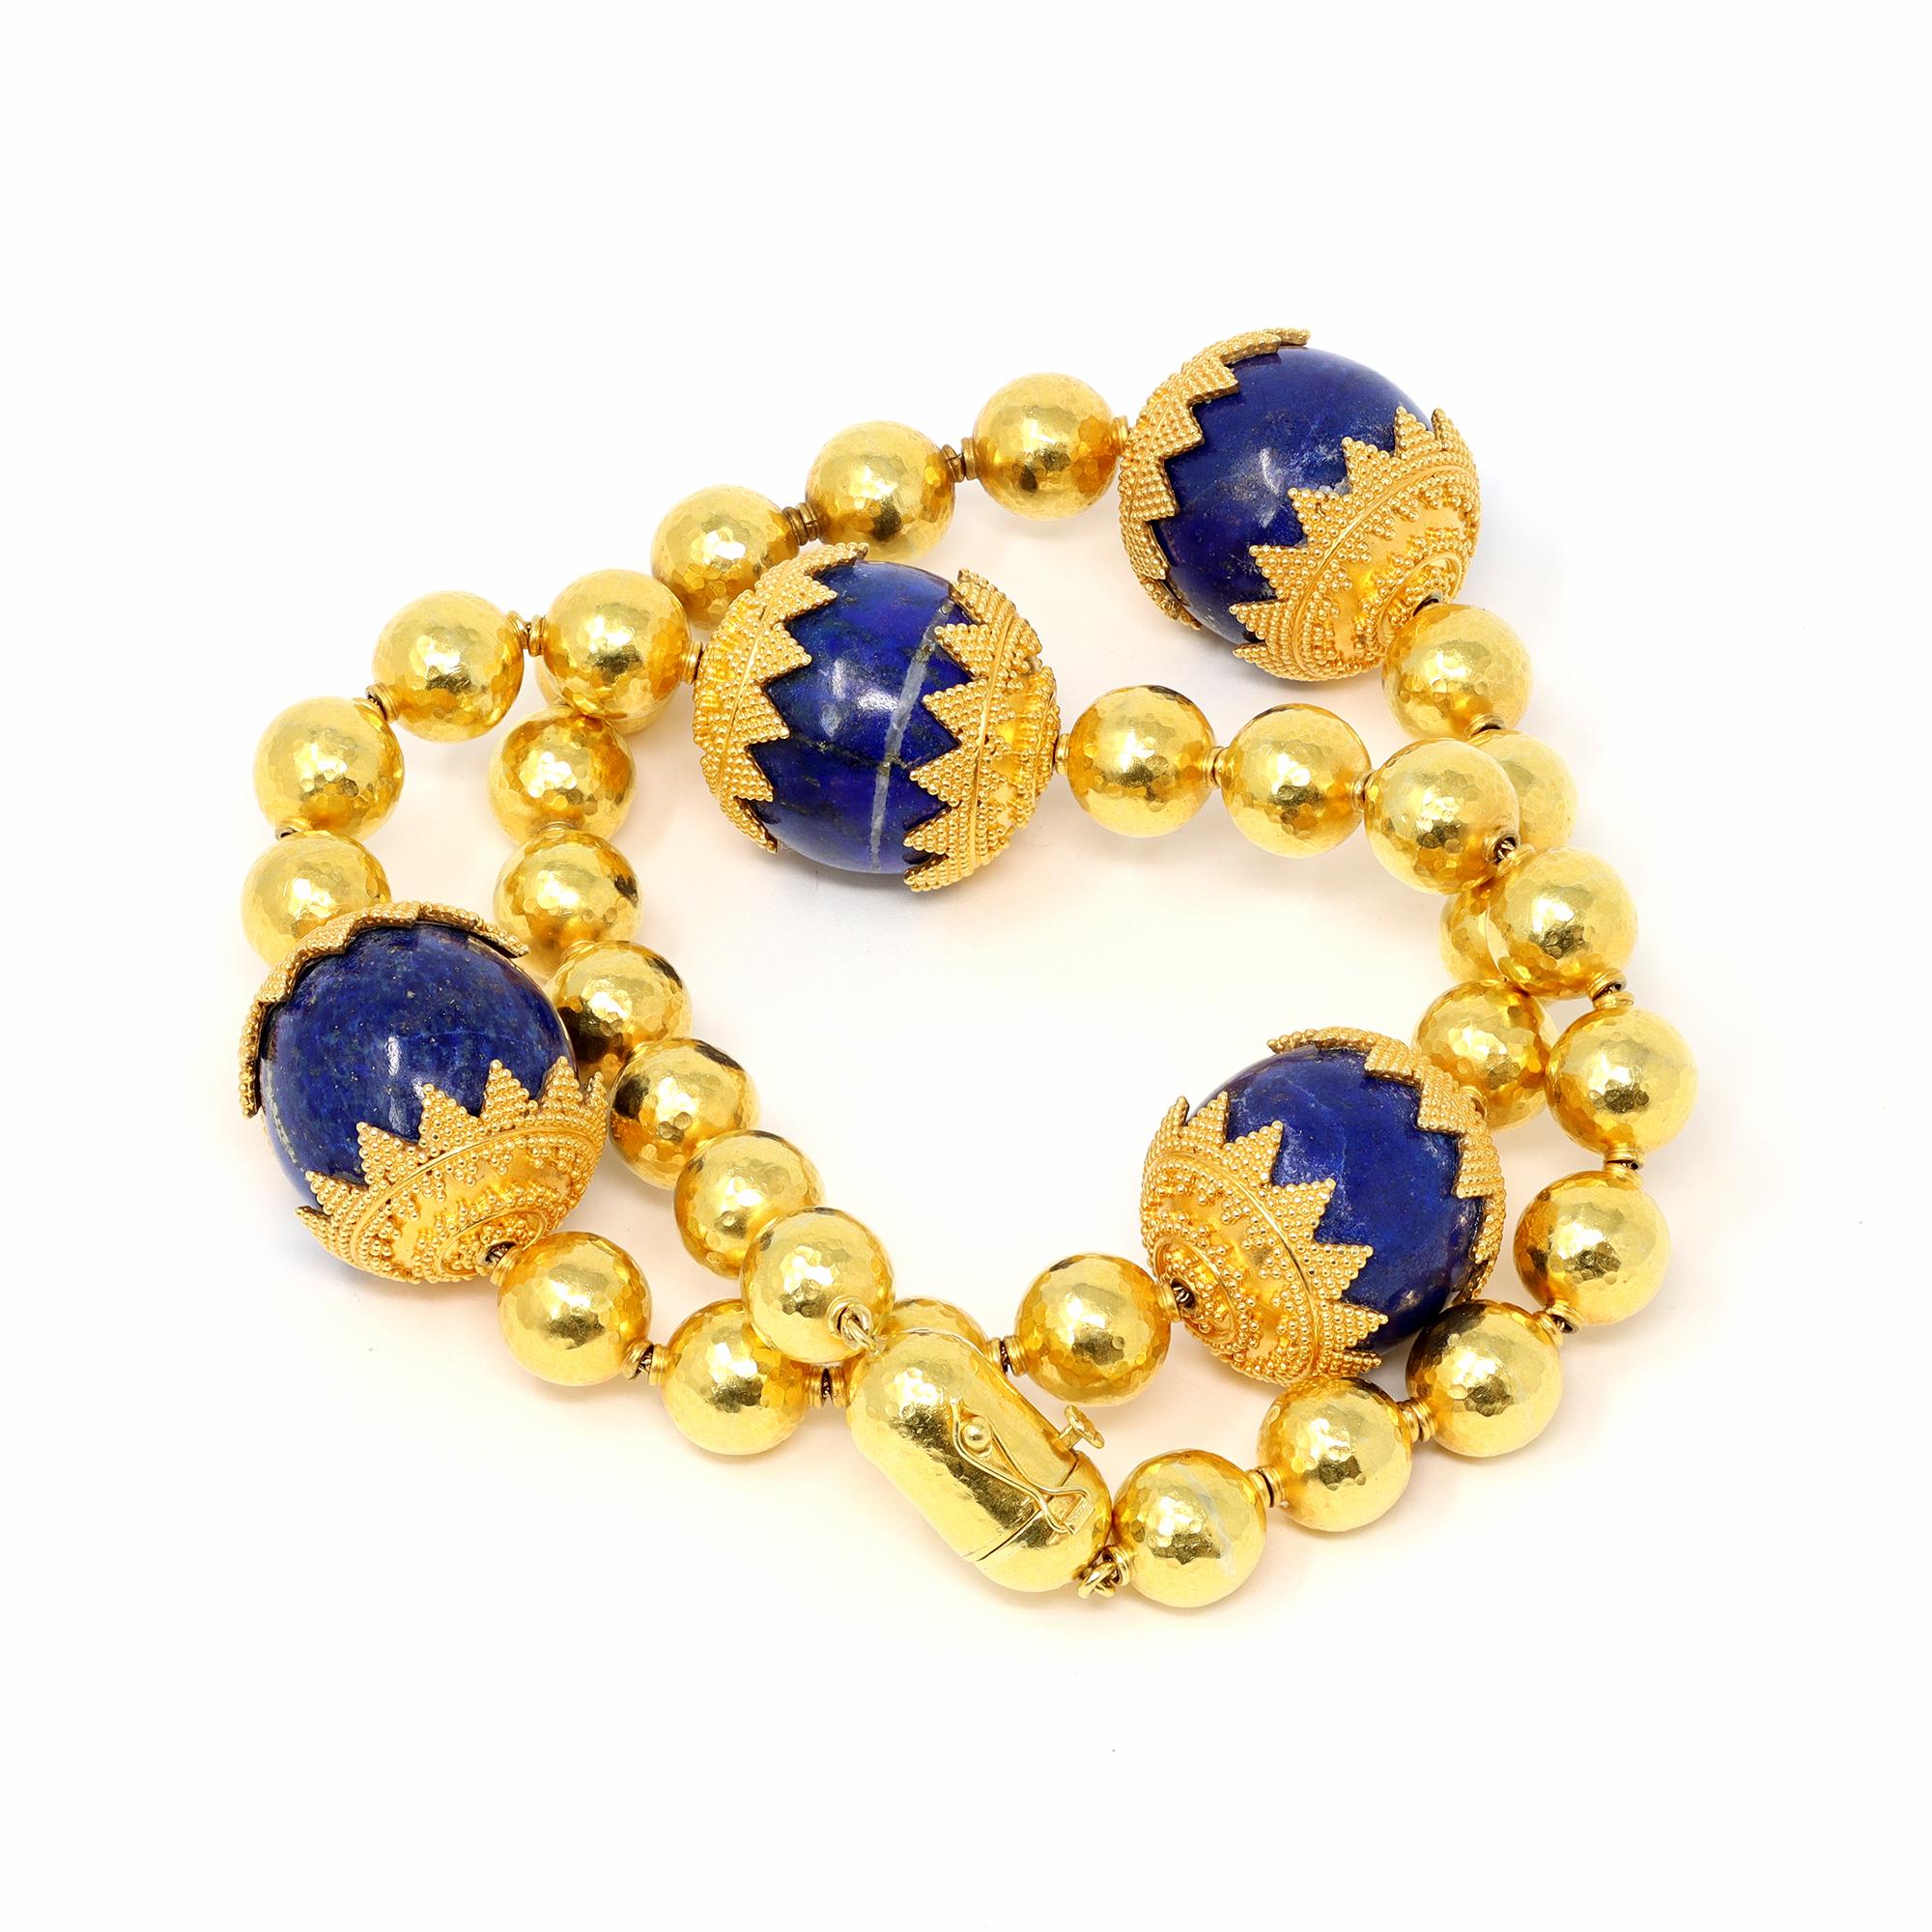 A spectacular Necklace Circa 1970 composed of four lapis lazuli beads capped at each end with milgrain gold work, spaced by  hammered gold beads. The gross weight 144.1 grams with a length of 18 ¾ inches, a width of  ⅞ inch, made in 22 karat and 18